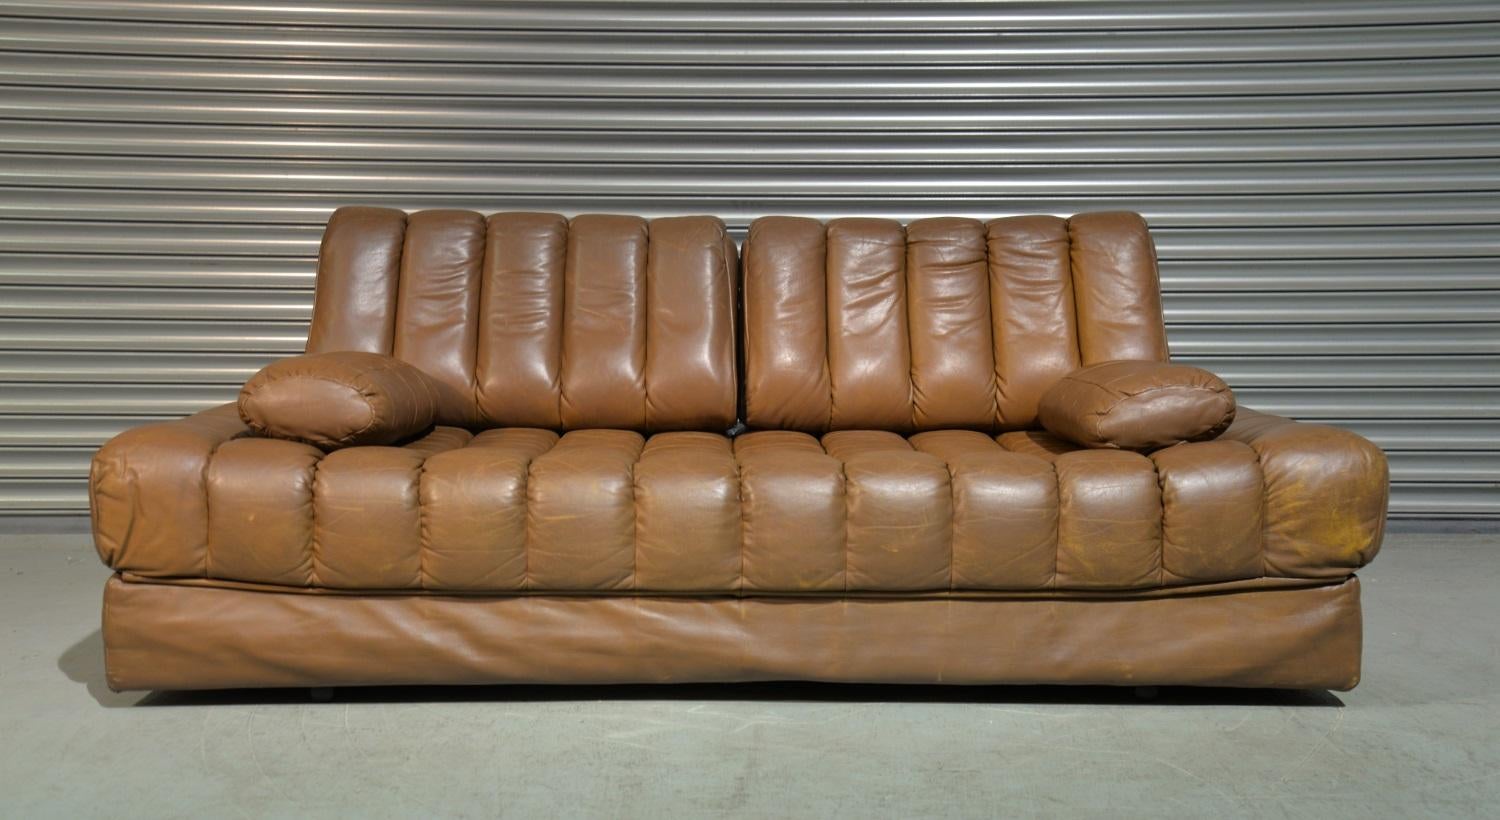 Discounted airfreight for our US and International customers ( from 2 weeks door to door)

We are delighted to bring to you a highly desirable retro De Sede daybed and sofa. Rarely available and hand built in the 1960s by De Sede craftsman in